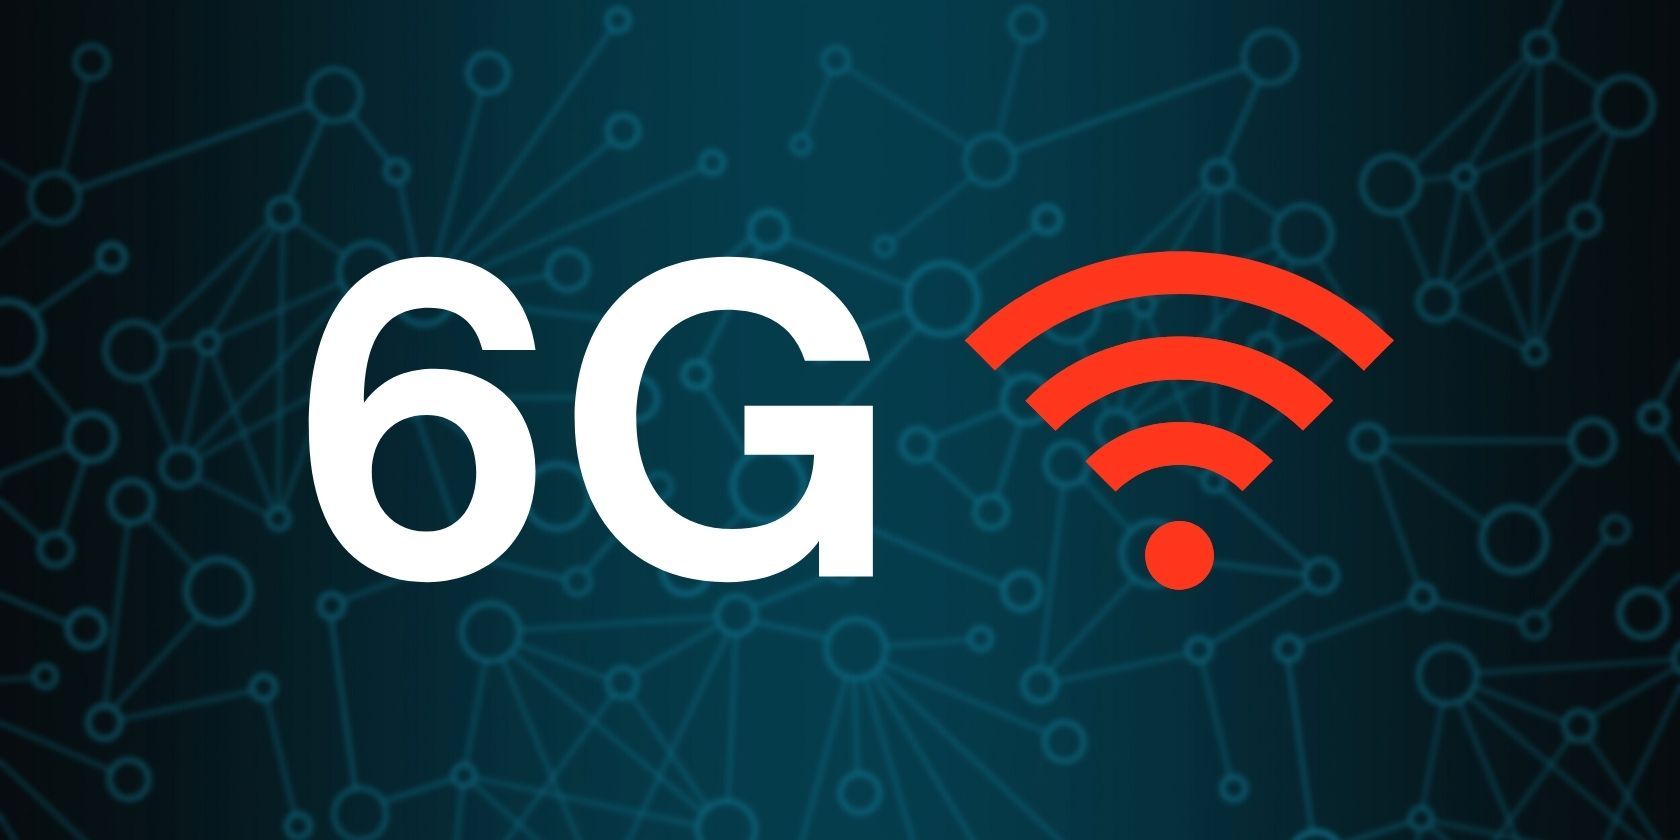 Picture of 6G and the Wi-Fi symbol